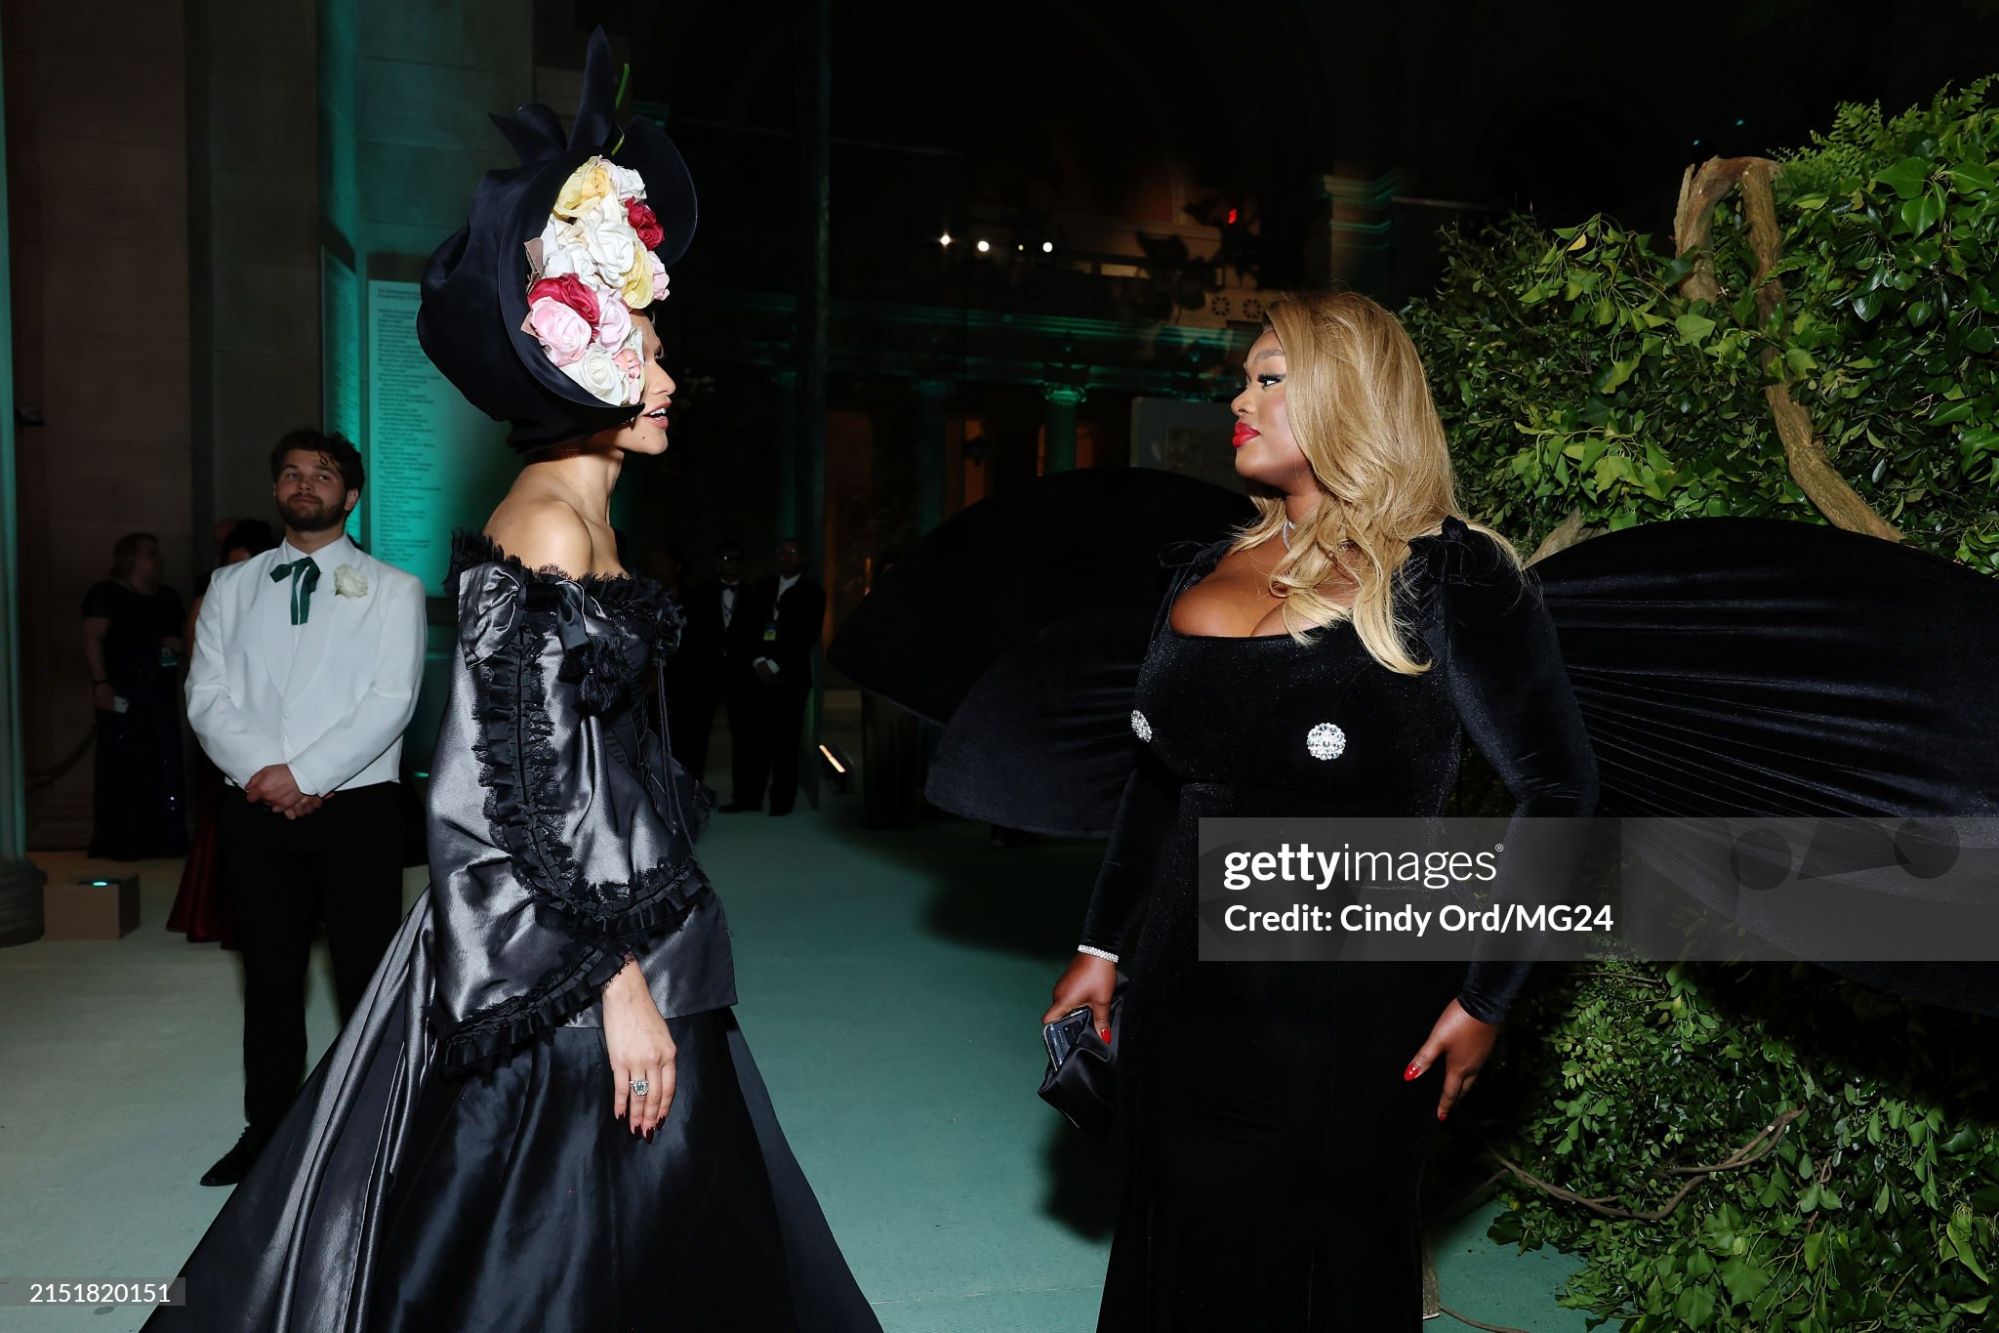 gettyimages-2151820151-2048x2048.jpg